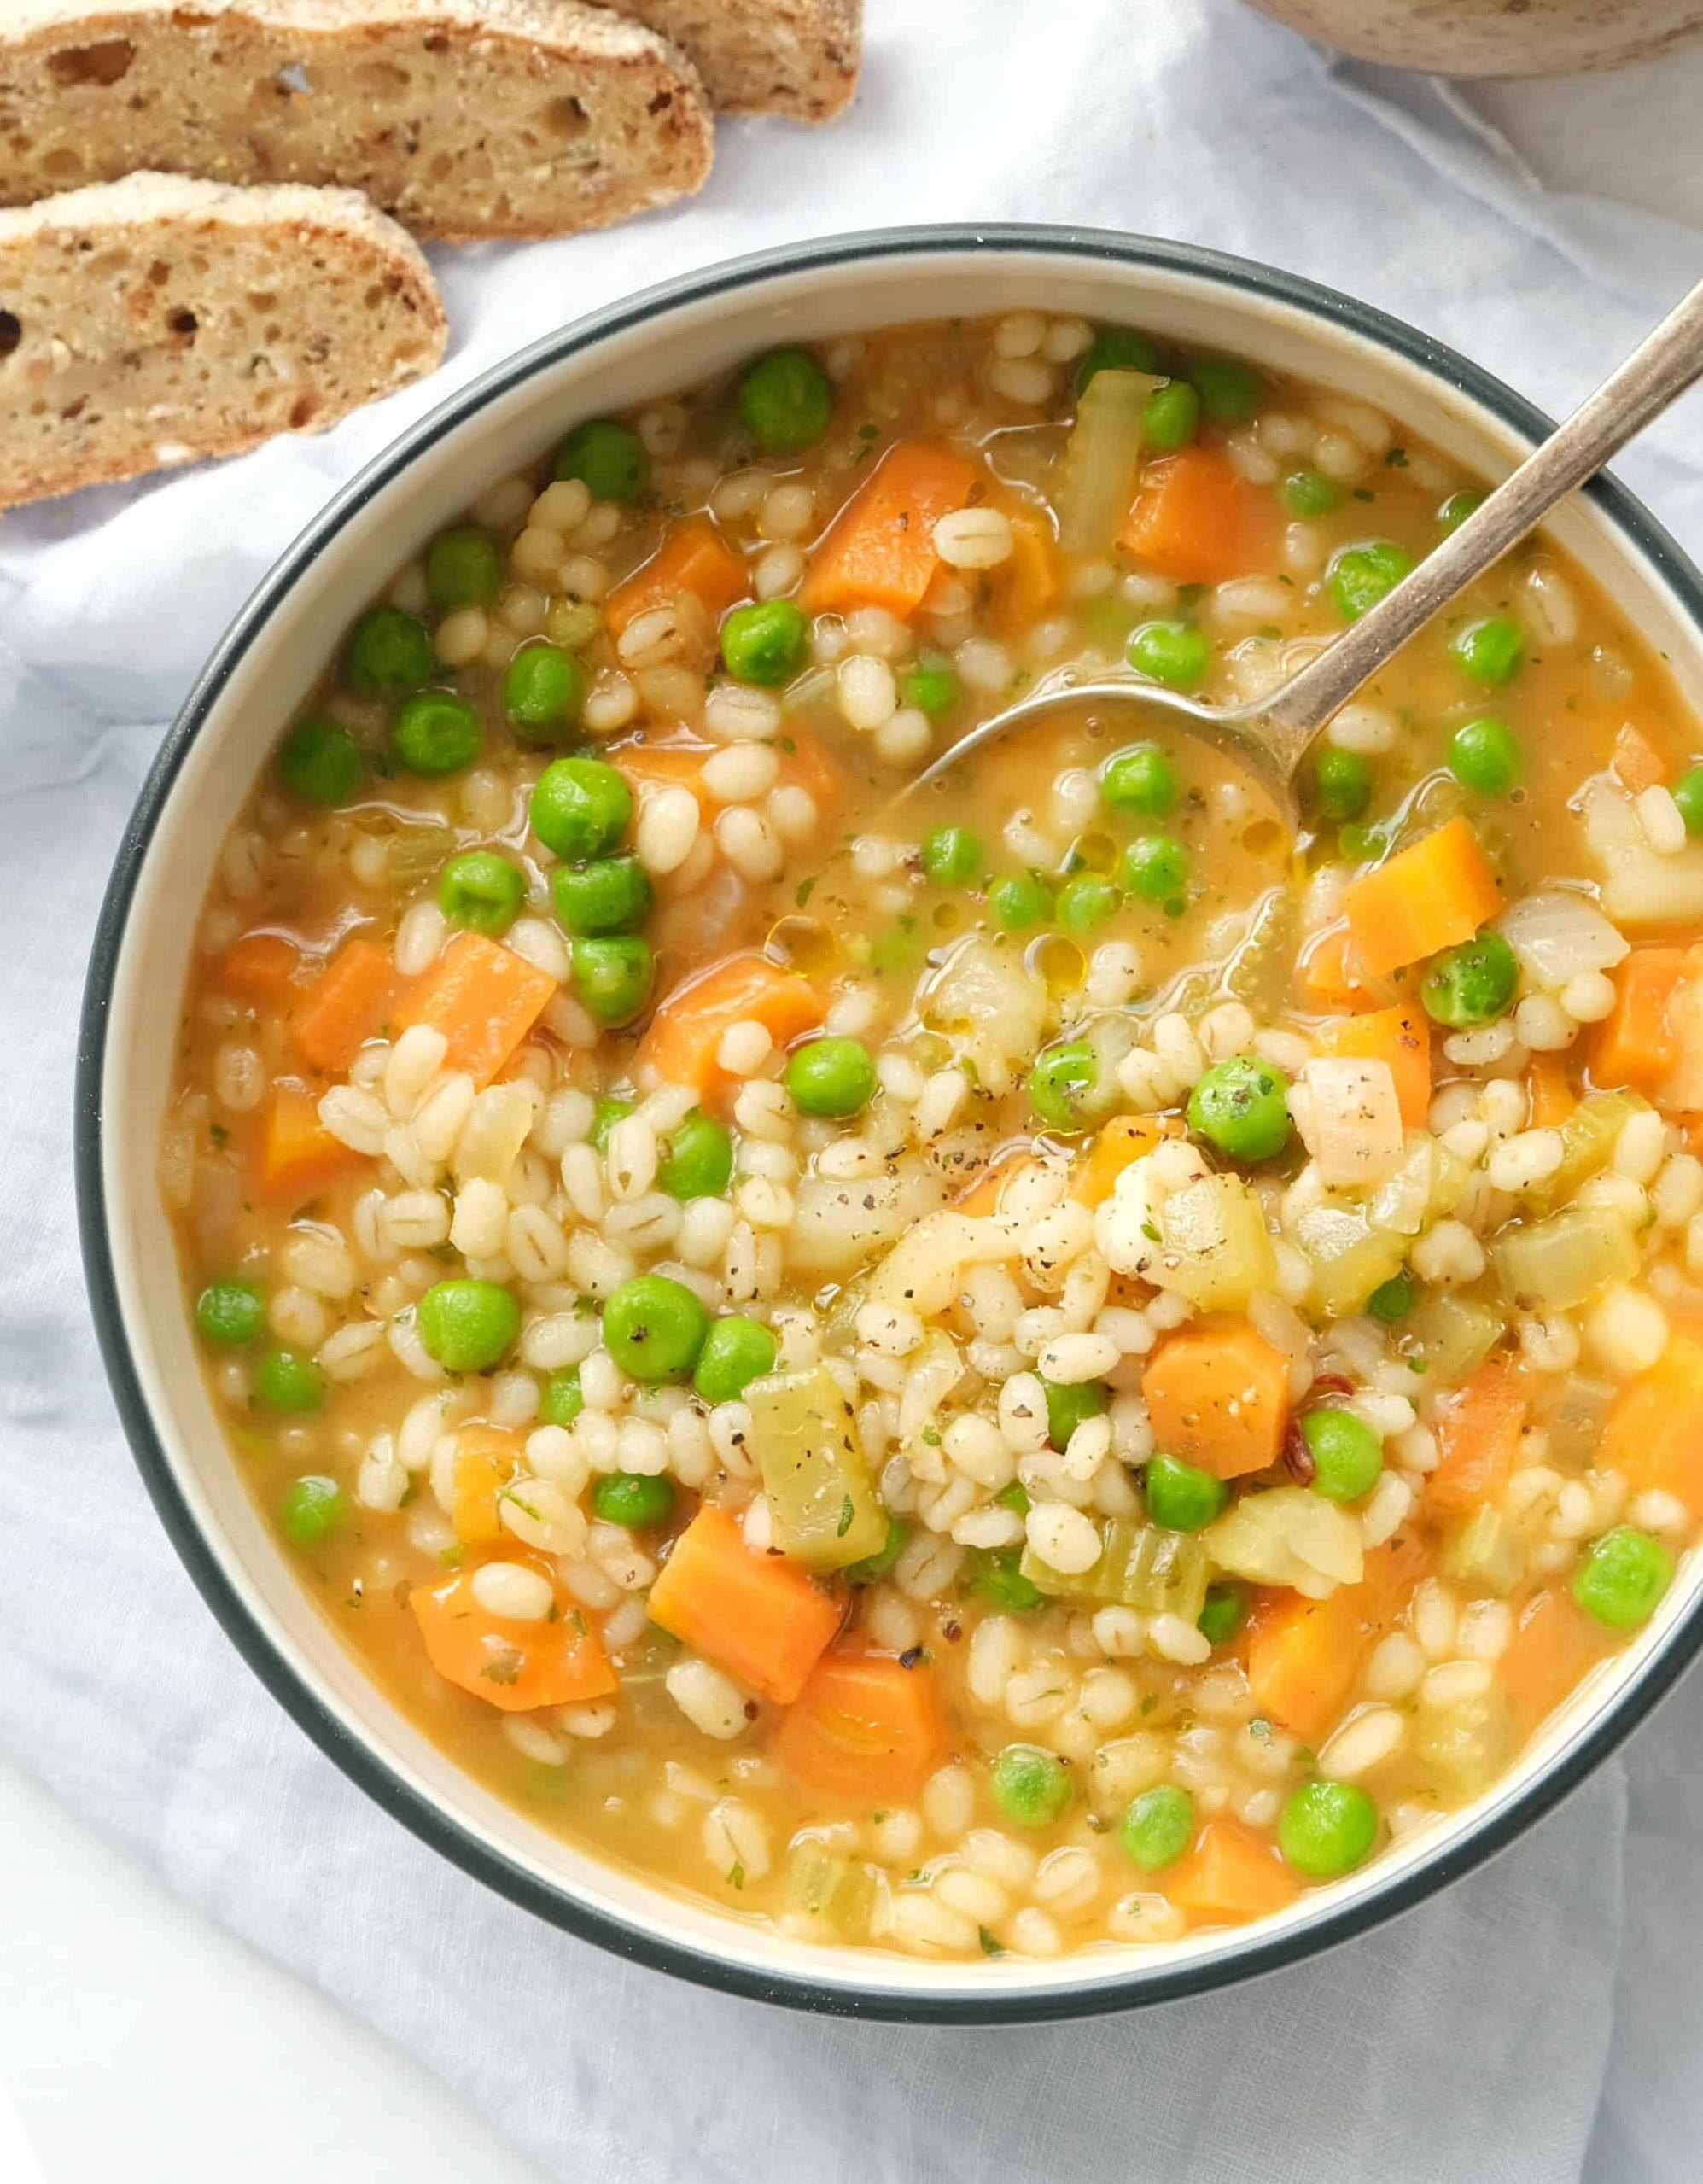  This soup is not only delicious, but also vegan and gluten-free, making it a great option for those with dietary restrictions.